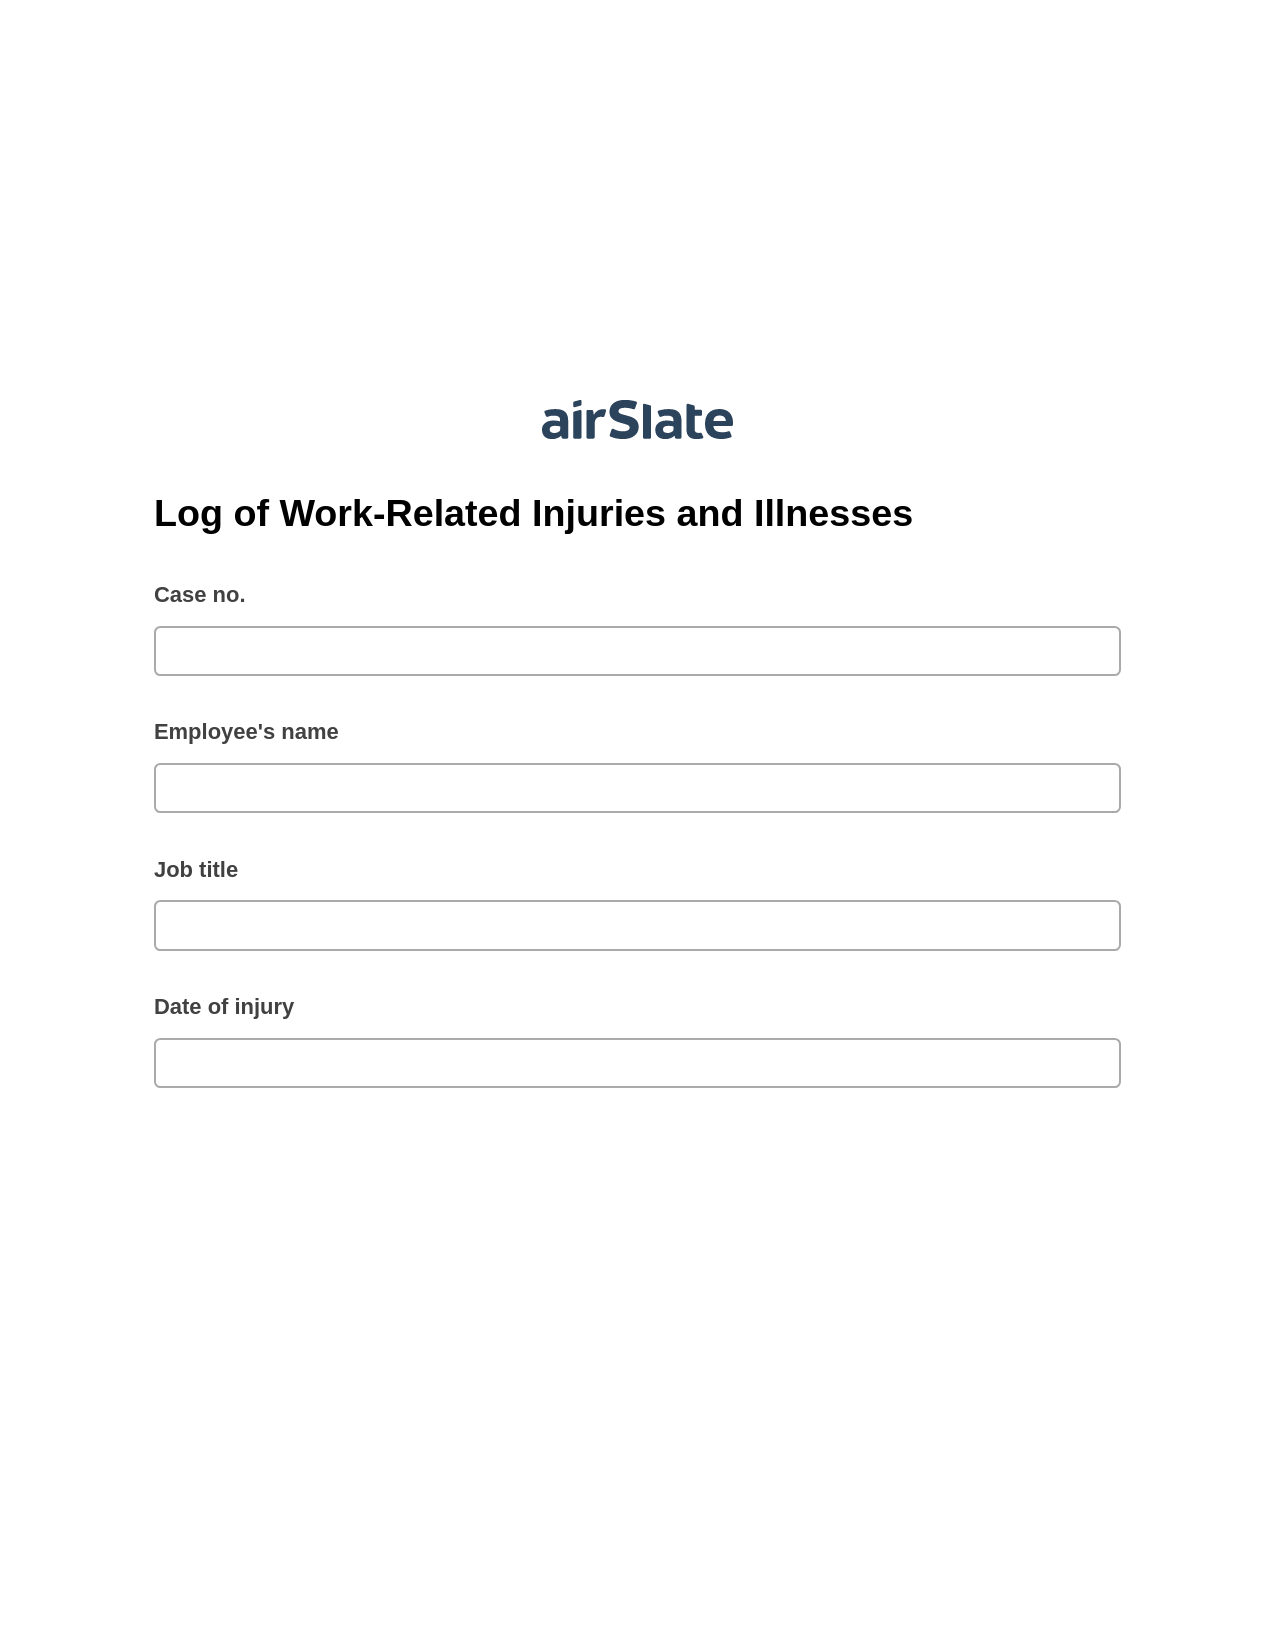 Multirole Log of Work-Related Injuries and Illnesses System Bot - Slack Two-Way Binding Bot, Remove Slate Bot, Post-finish Document Bot